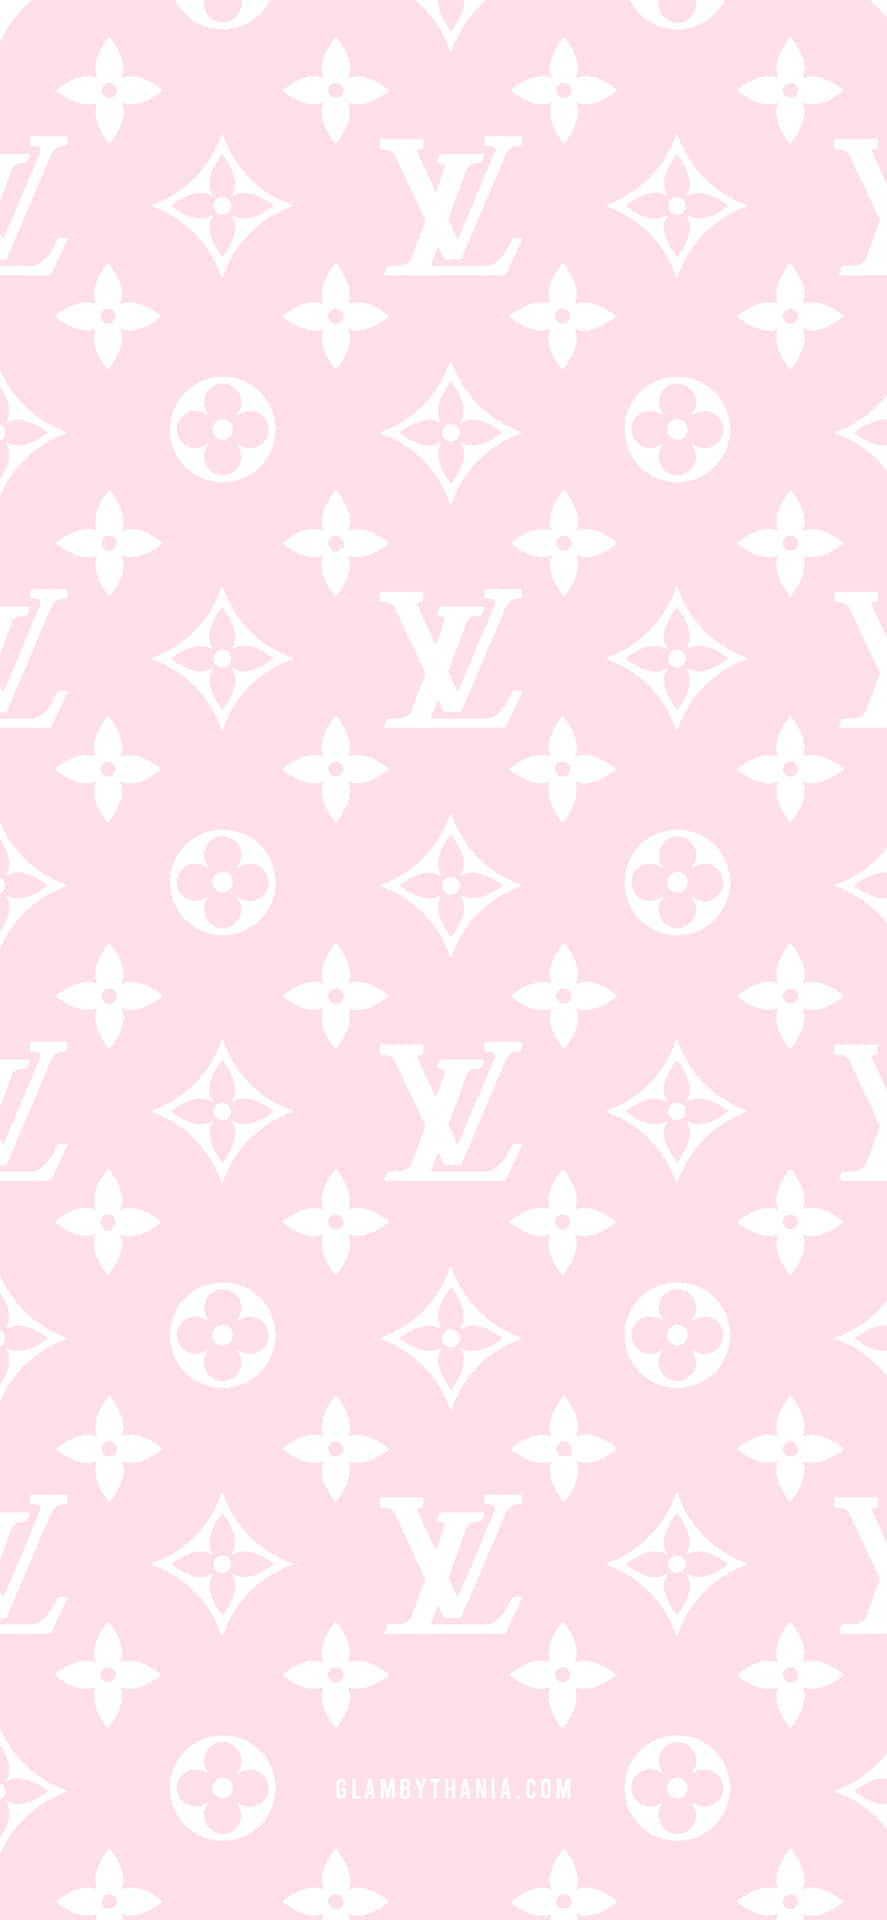 Louis Vuitton Wallpaper In Pink And White Wallpaper